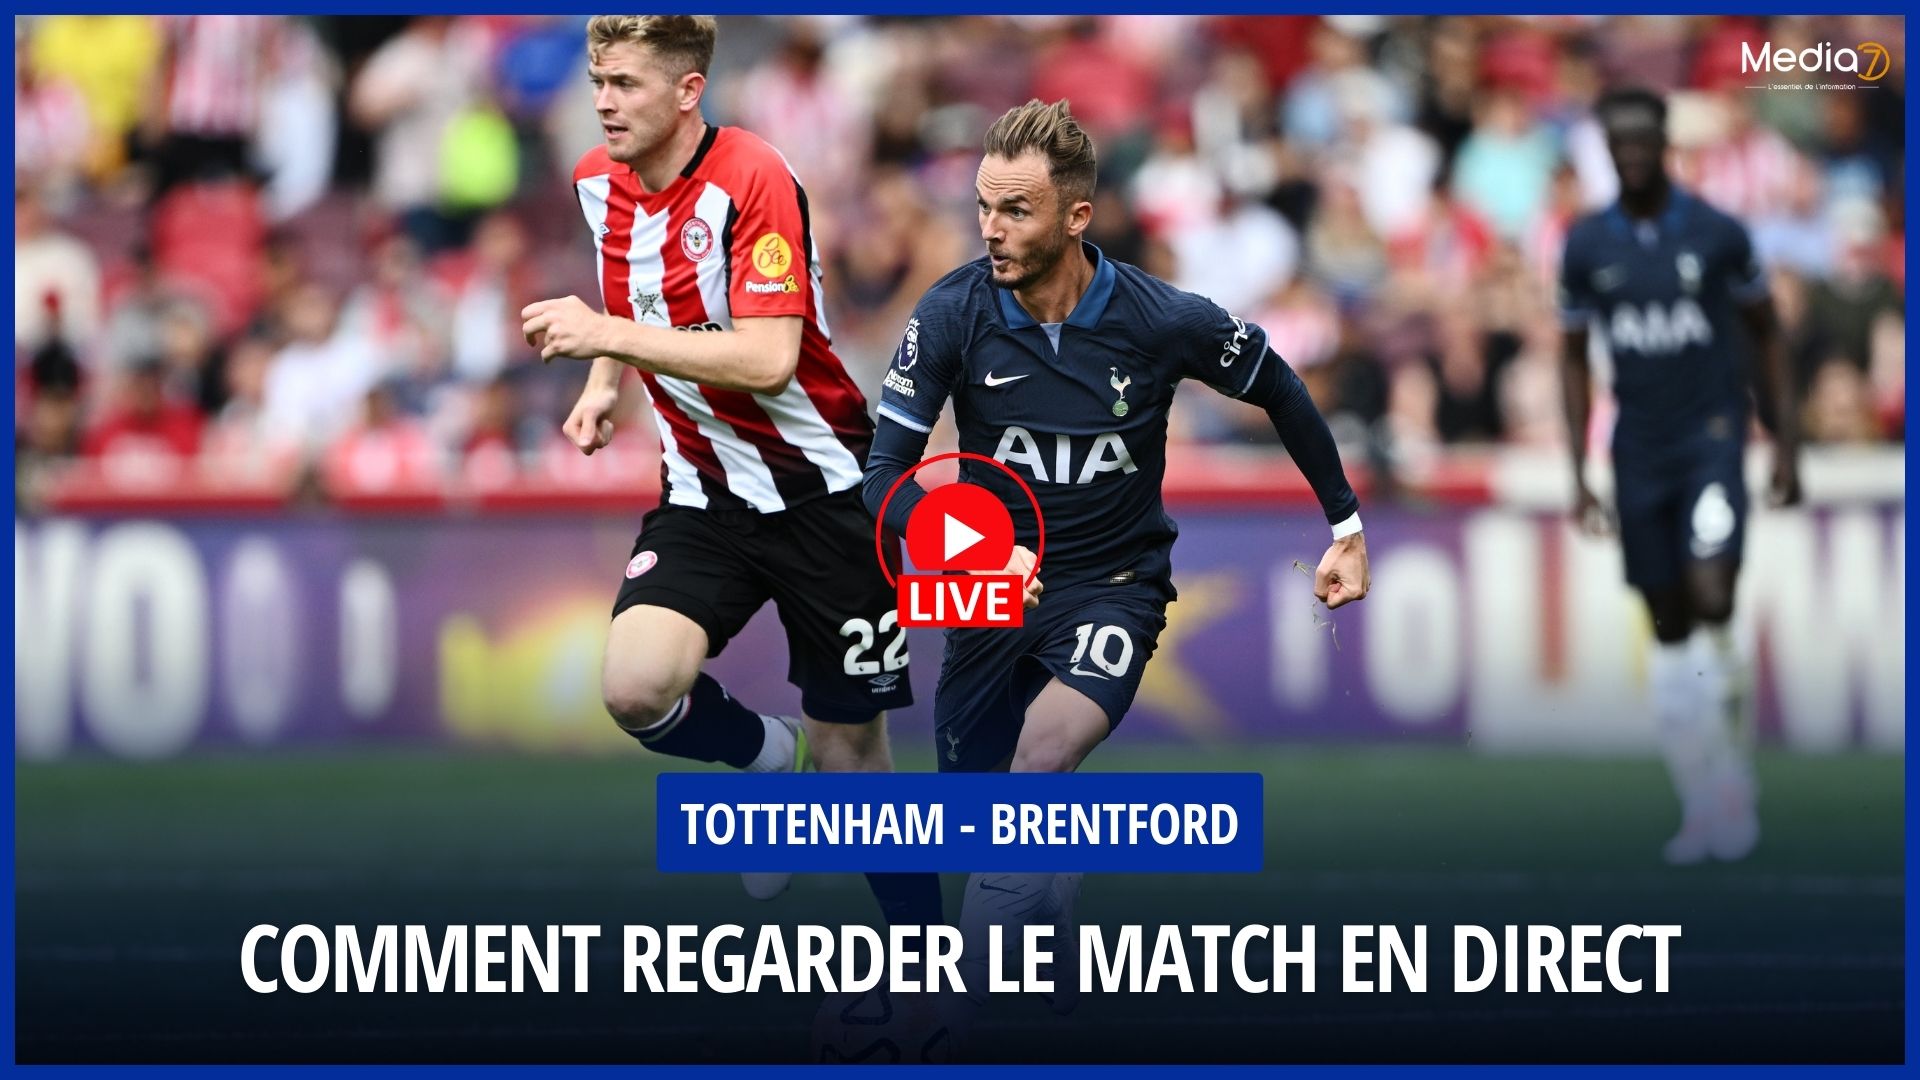 Tottenham – Brentford match live: On which TV & streaming channel? At what time ? - Media7